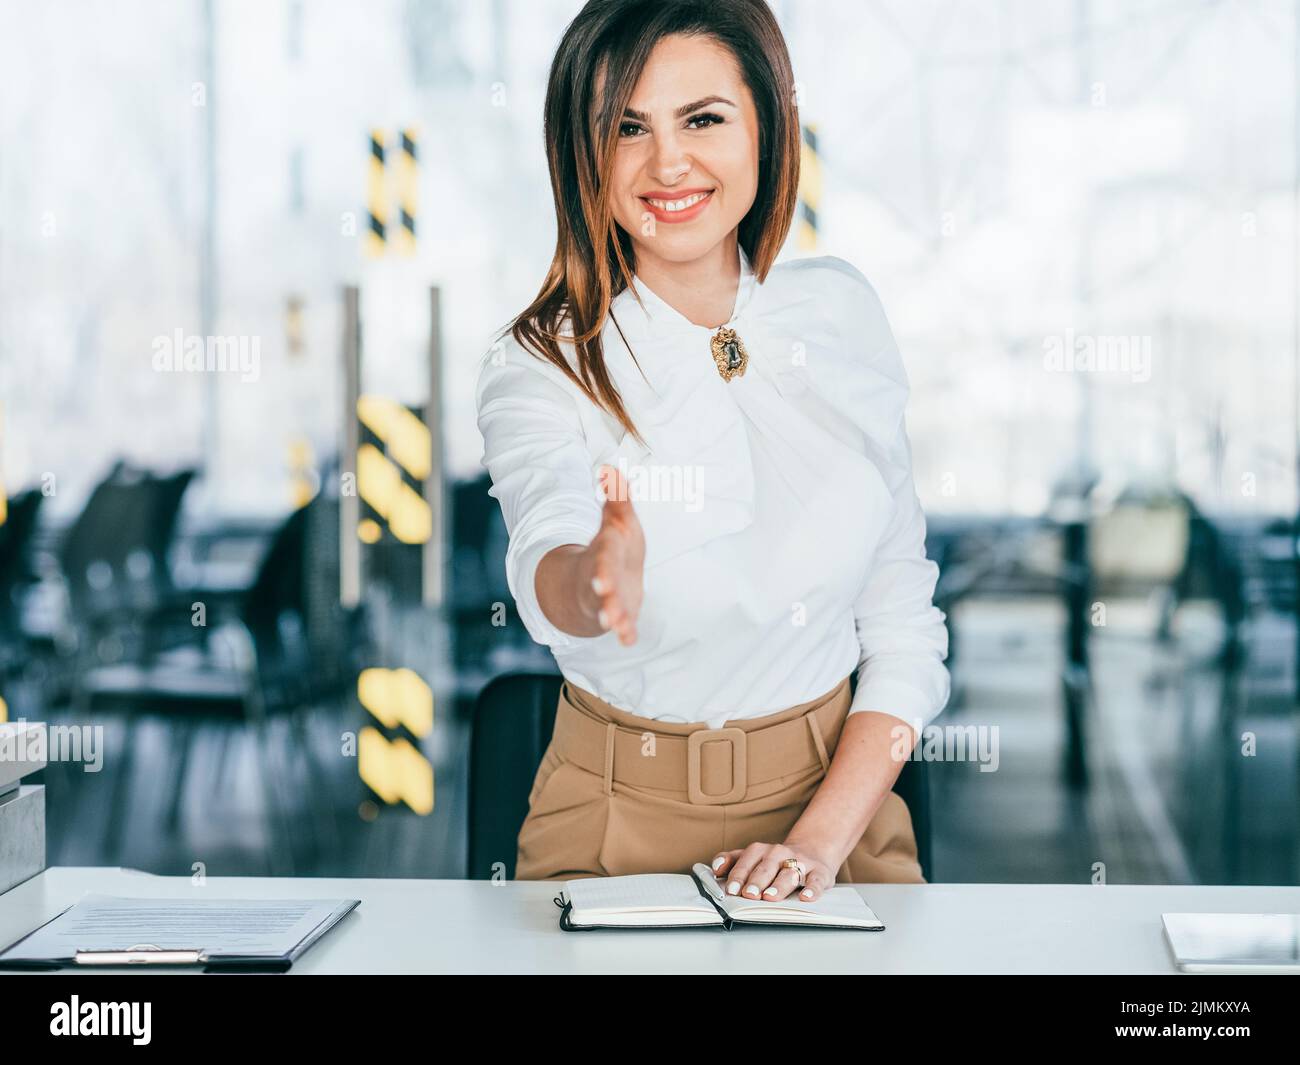 human resources job interview appointment female Stock Photo